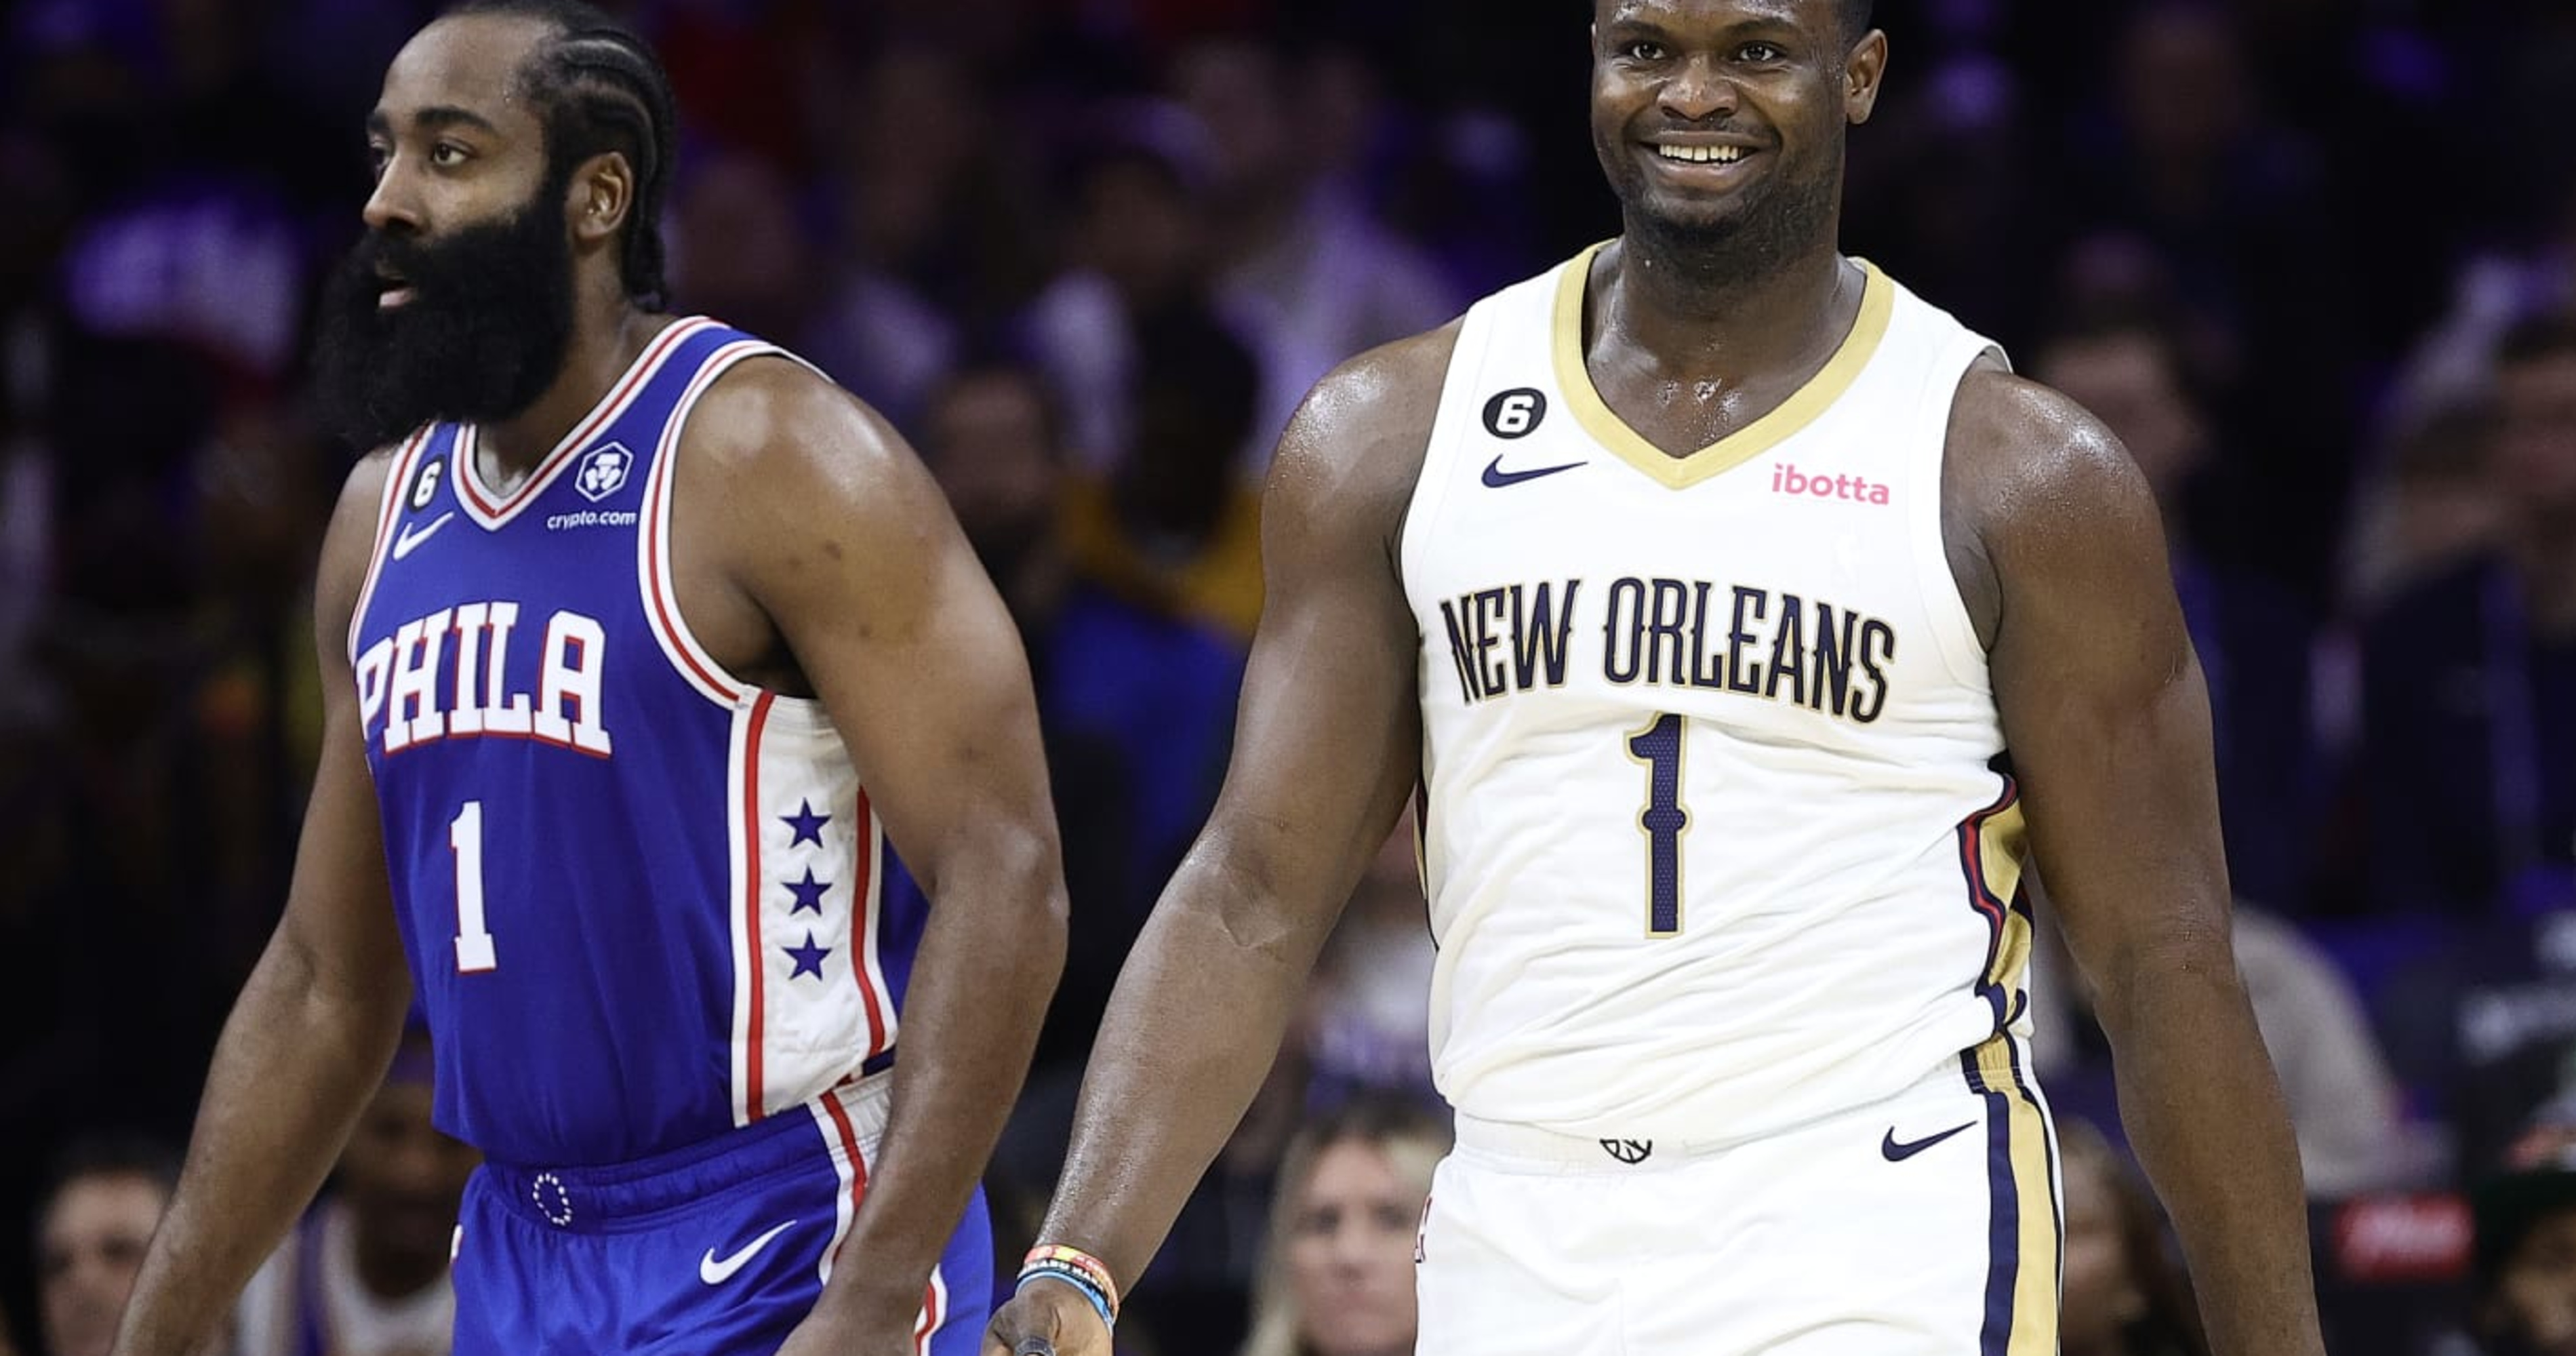 New Orleans Pelicans 2023-24 Salary Cap Table